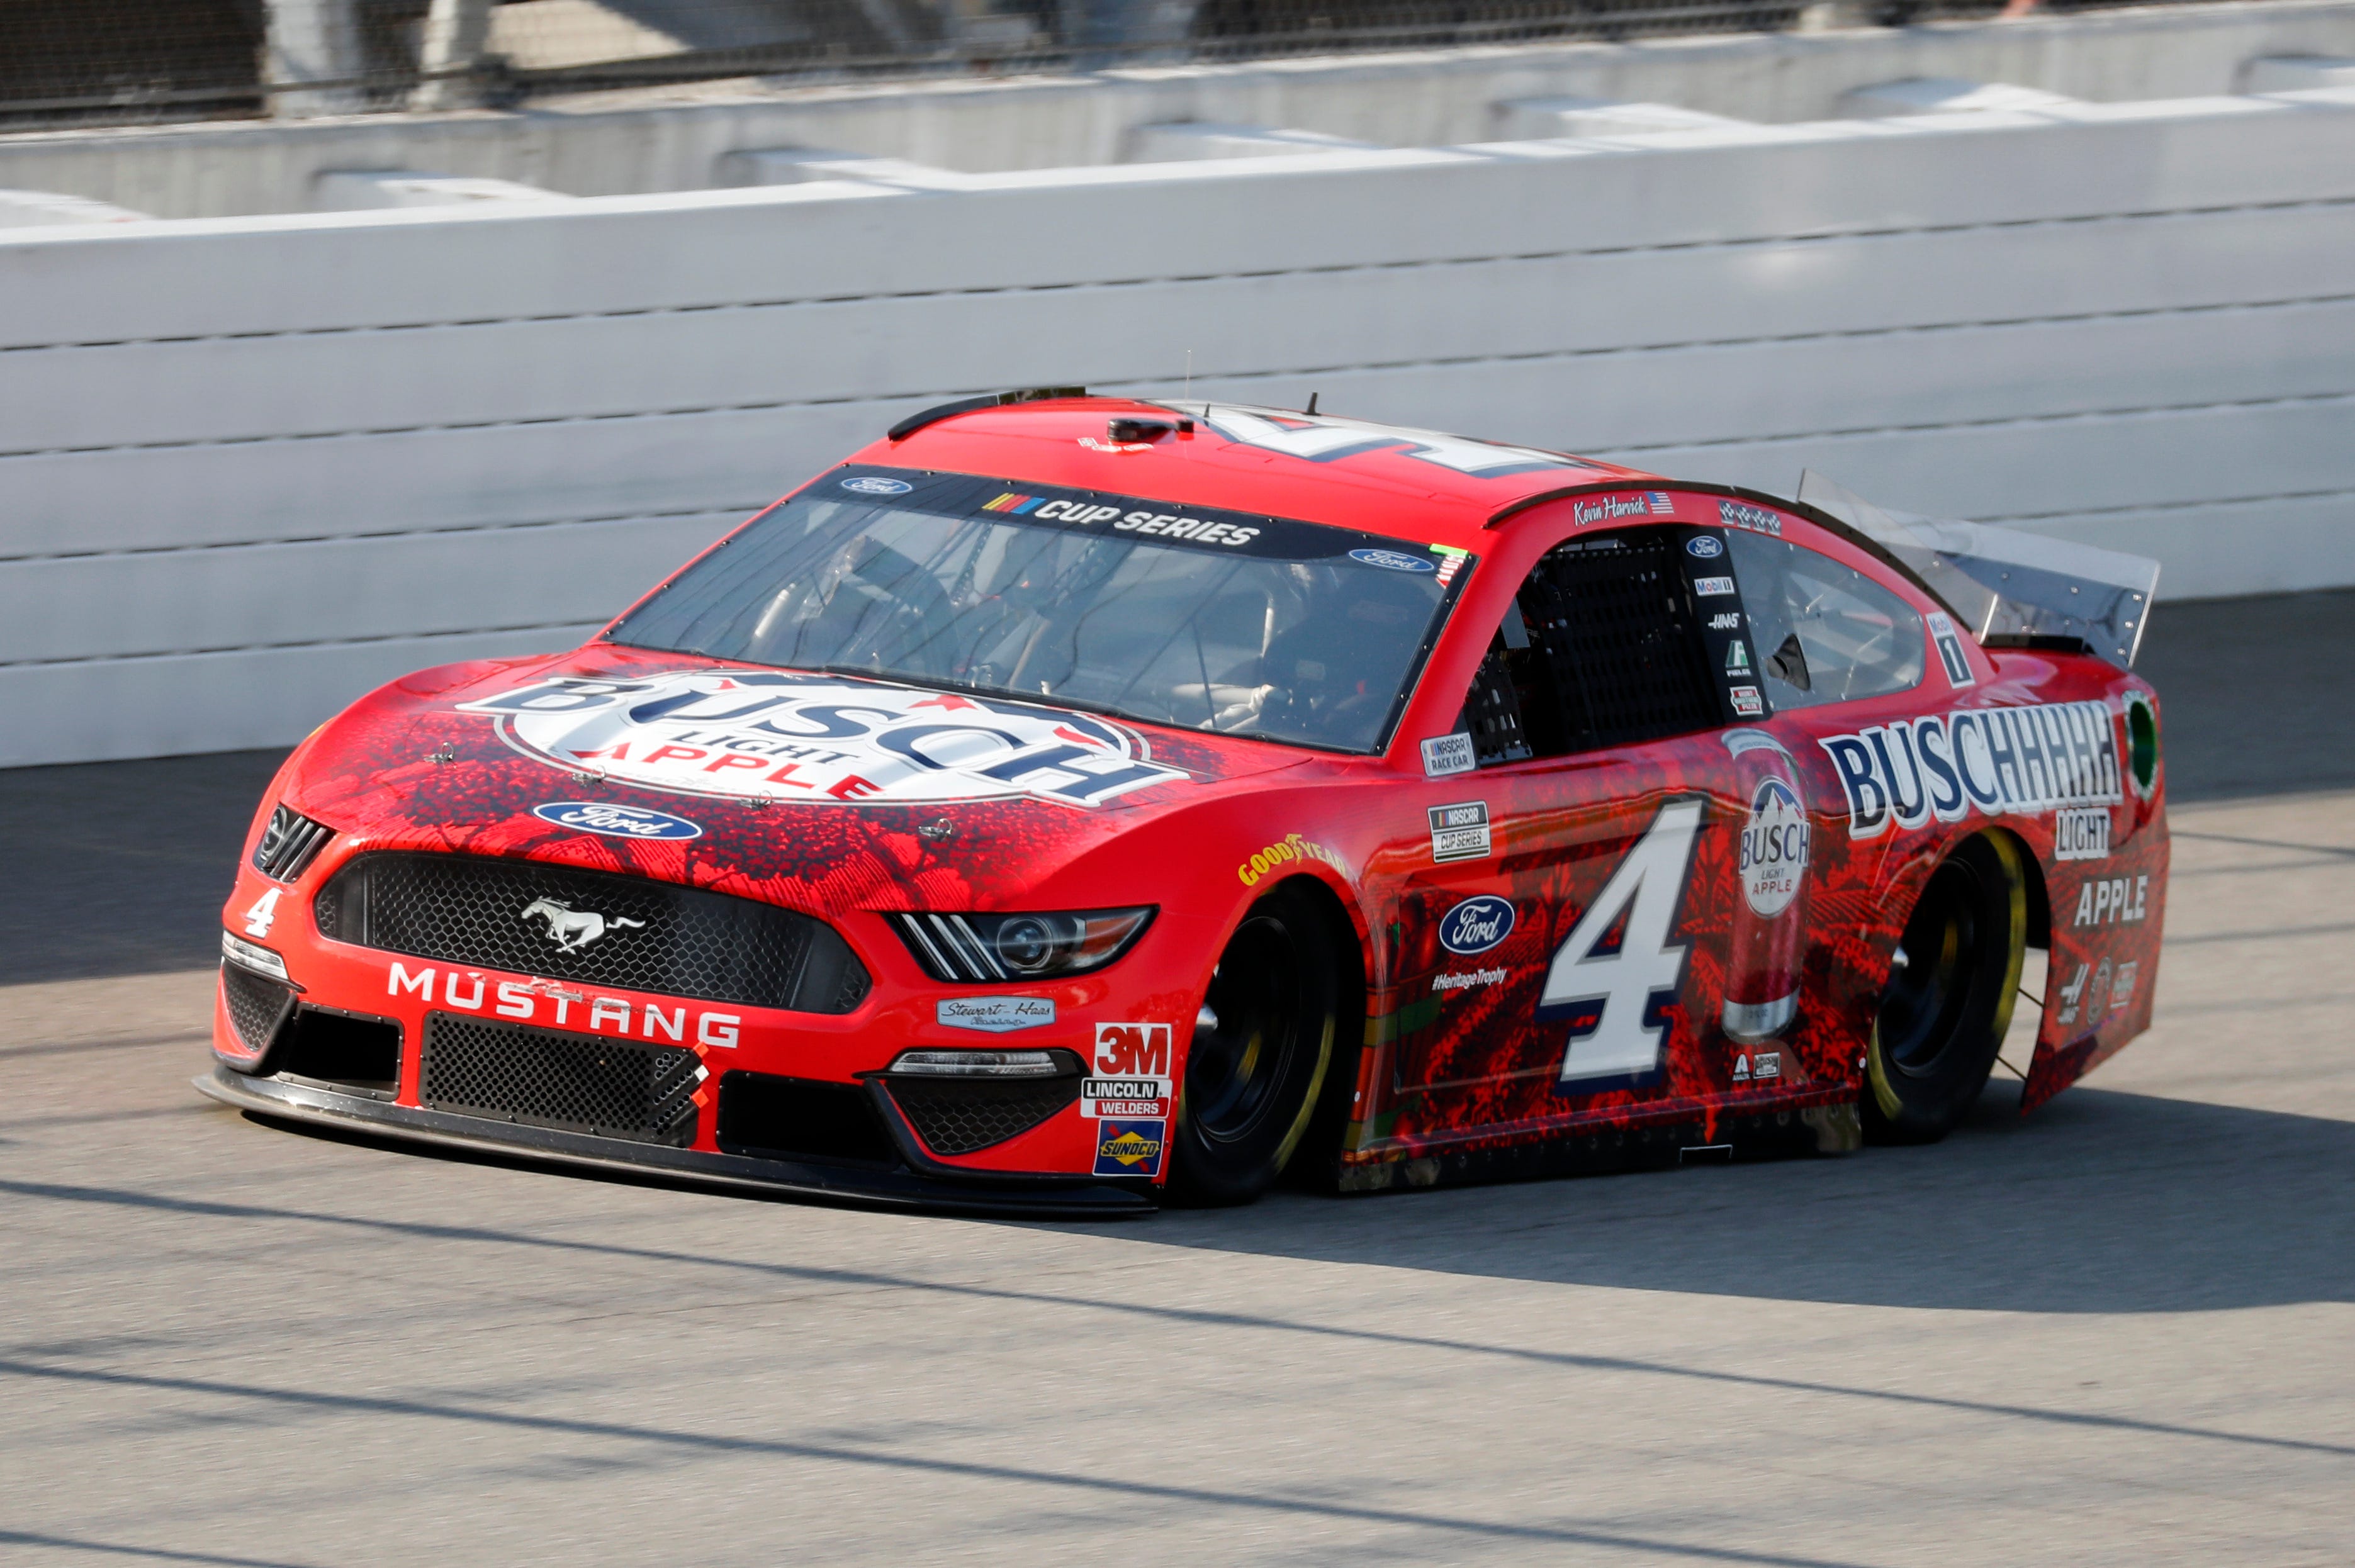 Kevin Harvick competes during a NASCAR Cup Series auto race at Michigan International Speedway